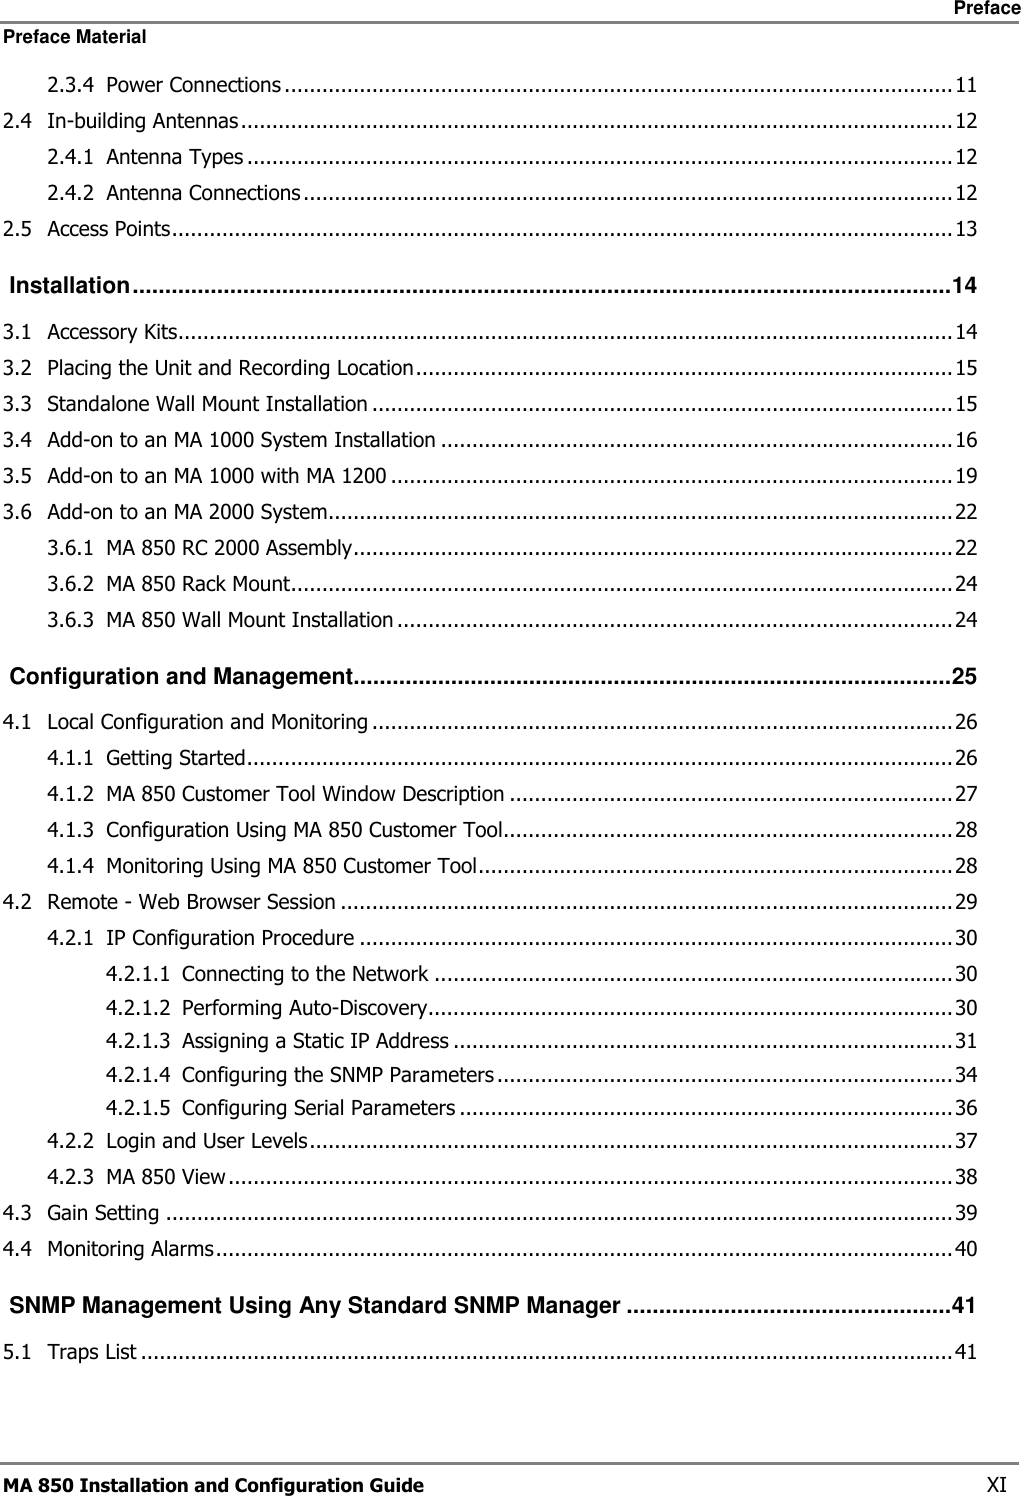     Preface Preface Material      MA 850 Installation and Configuration Guide    XI 2.3.4 Power Connections ...........................................................................................................11 2.4 In-building Antennas..................................................................................................................12 2.4.1 Antenna Types .................................................................................................................12 2.4.2 Antenna Connections ........................................................................................................12 2.5 Access Points.............................................................................................................................13  Installation..............................................................................................................................14 3.1 Accessory Kits............................................................................................................................14 3.2 Placing the Unit and Recording Location......................................................................................15 3.3 Standalone Wall Mount Installation .............................................................................................15 3.4 Add-on to an MA 1000 System Installation ..................................................................................16 3.5 Add-on to an MA 1000 with MA 1200 ..........................................................................................19 3.6 Add-on to an MA 2000 System....................................................................................................22 3.6.1 MA 850 RC 2000 Assembly................................................................................................22 3.6.2 MA 850 Rack Mount..........................................................................................................24 3.6.3 MA 850 Wall Mount Installation .........................................................................................24  Configuration and Management............................................................................................25 4.1 Local Configuration and Monitoring .............................................................................................26 4.1.1 Getting Started.................................................................................................................26 4.1.2 MA 850 Customer Tool Window Description .......................................................................27 4.1.3 Configuration Using MA 850 Customer Tool........................................................................28 4.1.4 Monitoring Using MA 850 Customer Tool............................................................................28 4.2 Remote - Web Browser Session ..................................................................................................29 4.2.1 IP Configuration Procedure ...............................................................................................30 4.2.1.1 Connecting to the Network ...................................................................................30 4.2.1.2 Performing Auto-Discovery....................................................................................30 4.2.1.3 Assigning a Static IP Address ................................................................................31 4.2.1.4 Configuring the SNMP Parameters .........................................................................34 4.2.1.5 Configuring Serial Parameters ...............................................................................36 4.2.2 Login and User Levels.......................................................................................................37 4.2.3 MA 850 View ....................................................................................................................38 4.3 Gain Setting ..............................................................................................................................39 4.4 Monitoring Alarms......................................................................................................................40  SNMP Management Using Any Standard SNMP Manager ..................................................41 5.1 Traps List ..................................................................................................................................41 